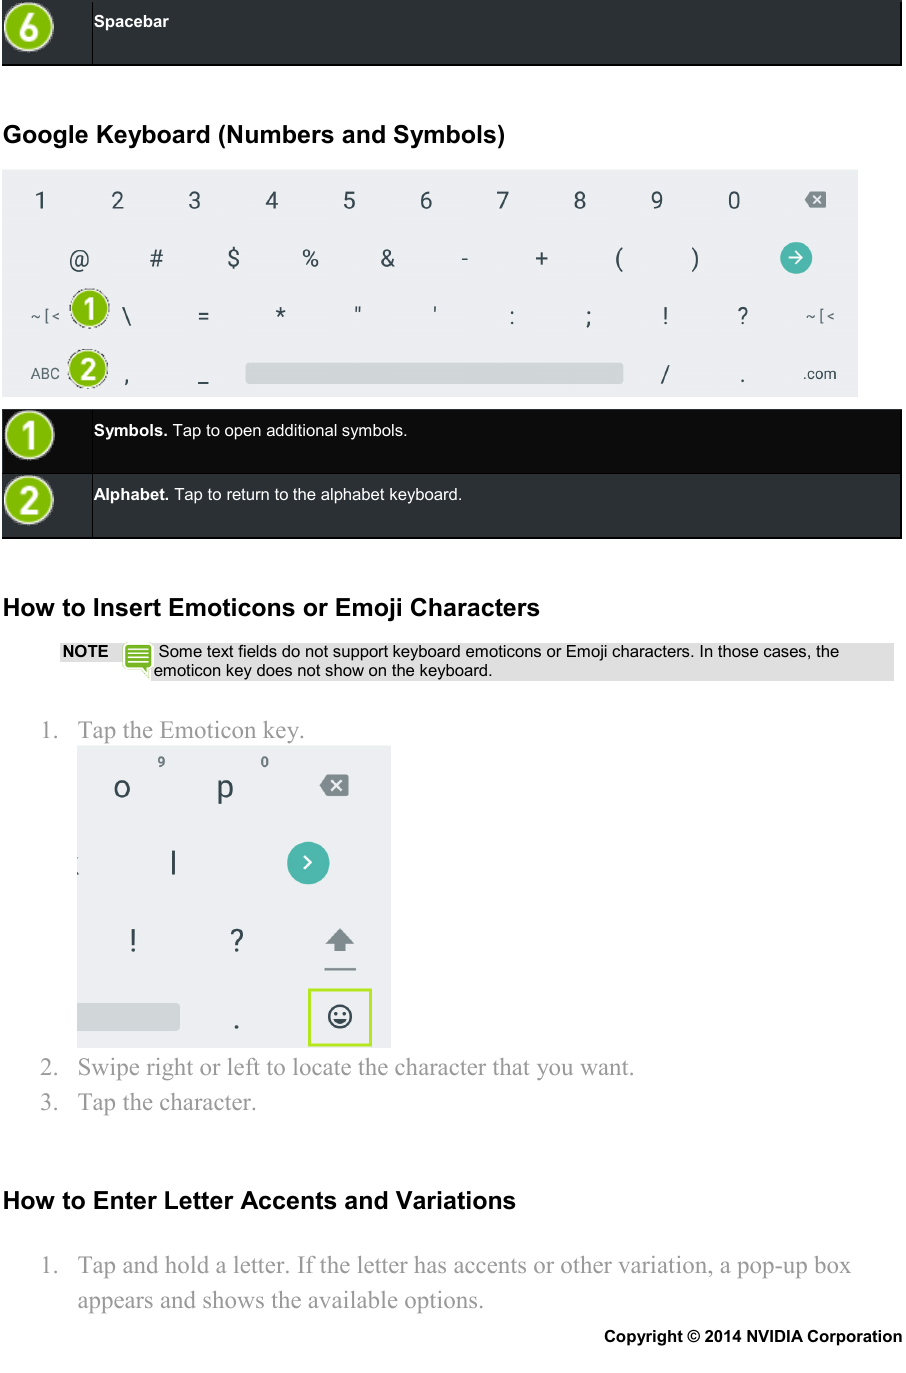  Spacebar   Google Keyboard (Numbers and Symbols)   Symbols. Tap to open additional symbols.  Alphabet. Tap to return to the alphabet keyboard.   How to Insert Emoticons or Emoji Characters NOTE  Some text fields do not support keyboard emoticons or Emoji characters. In those cases, the emoticon key does not show on the keyboard. 1. Tap the Emoticon key.  2. Swipe right or left to locate the character that you want. 3. Tap the character.   How to Enter Letter Accents and Variations 1. Tap and hold a letter. If the letter has accents or other variation, a pop-up box appears and shows the available options. Copyright © 2014 NVIDIA Corporation   